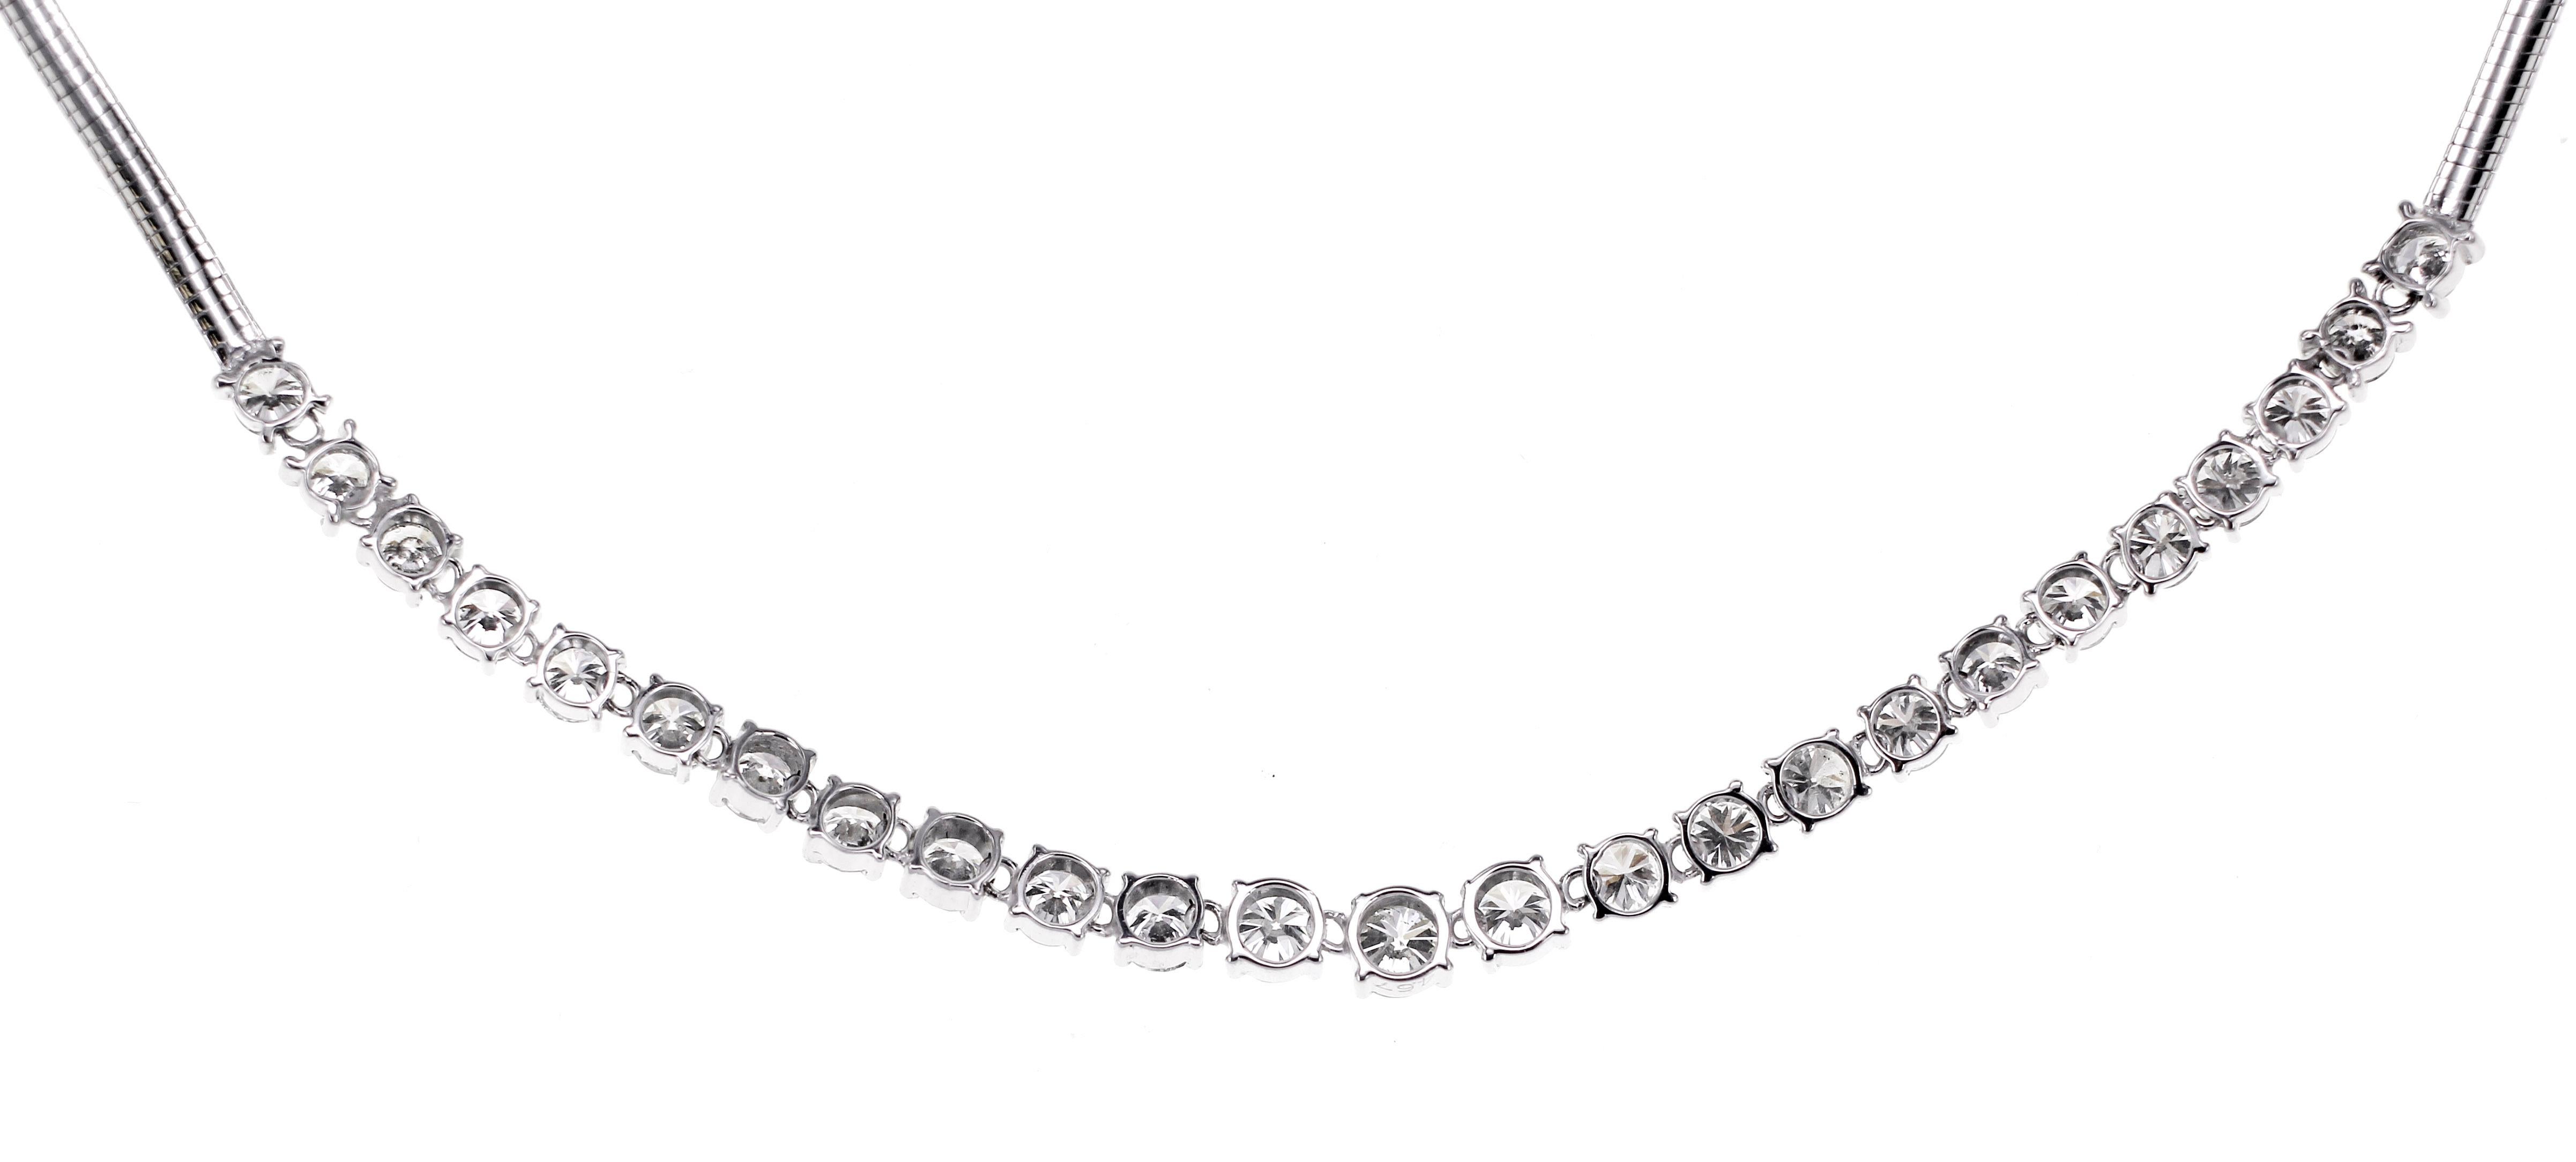 4.67 carats of white brilliant round diamond are set in Platinum in this tennis necklace. The details of the diamond are mentioned below:
Color: D
Clarity: Vvs
